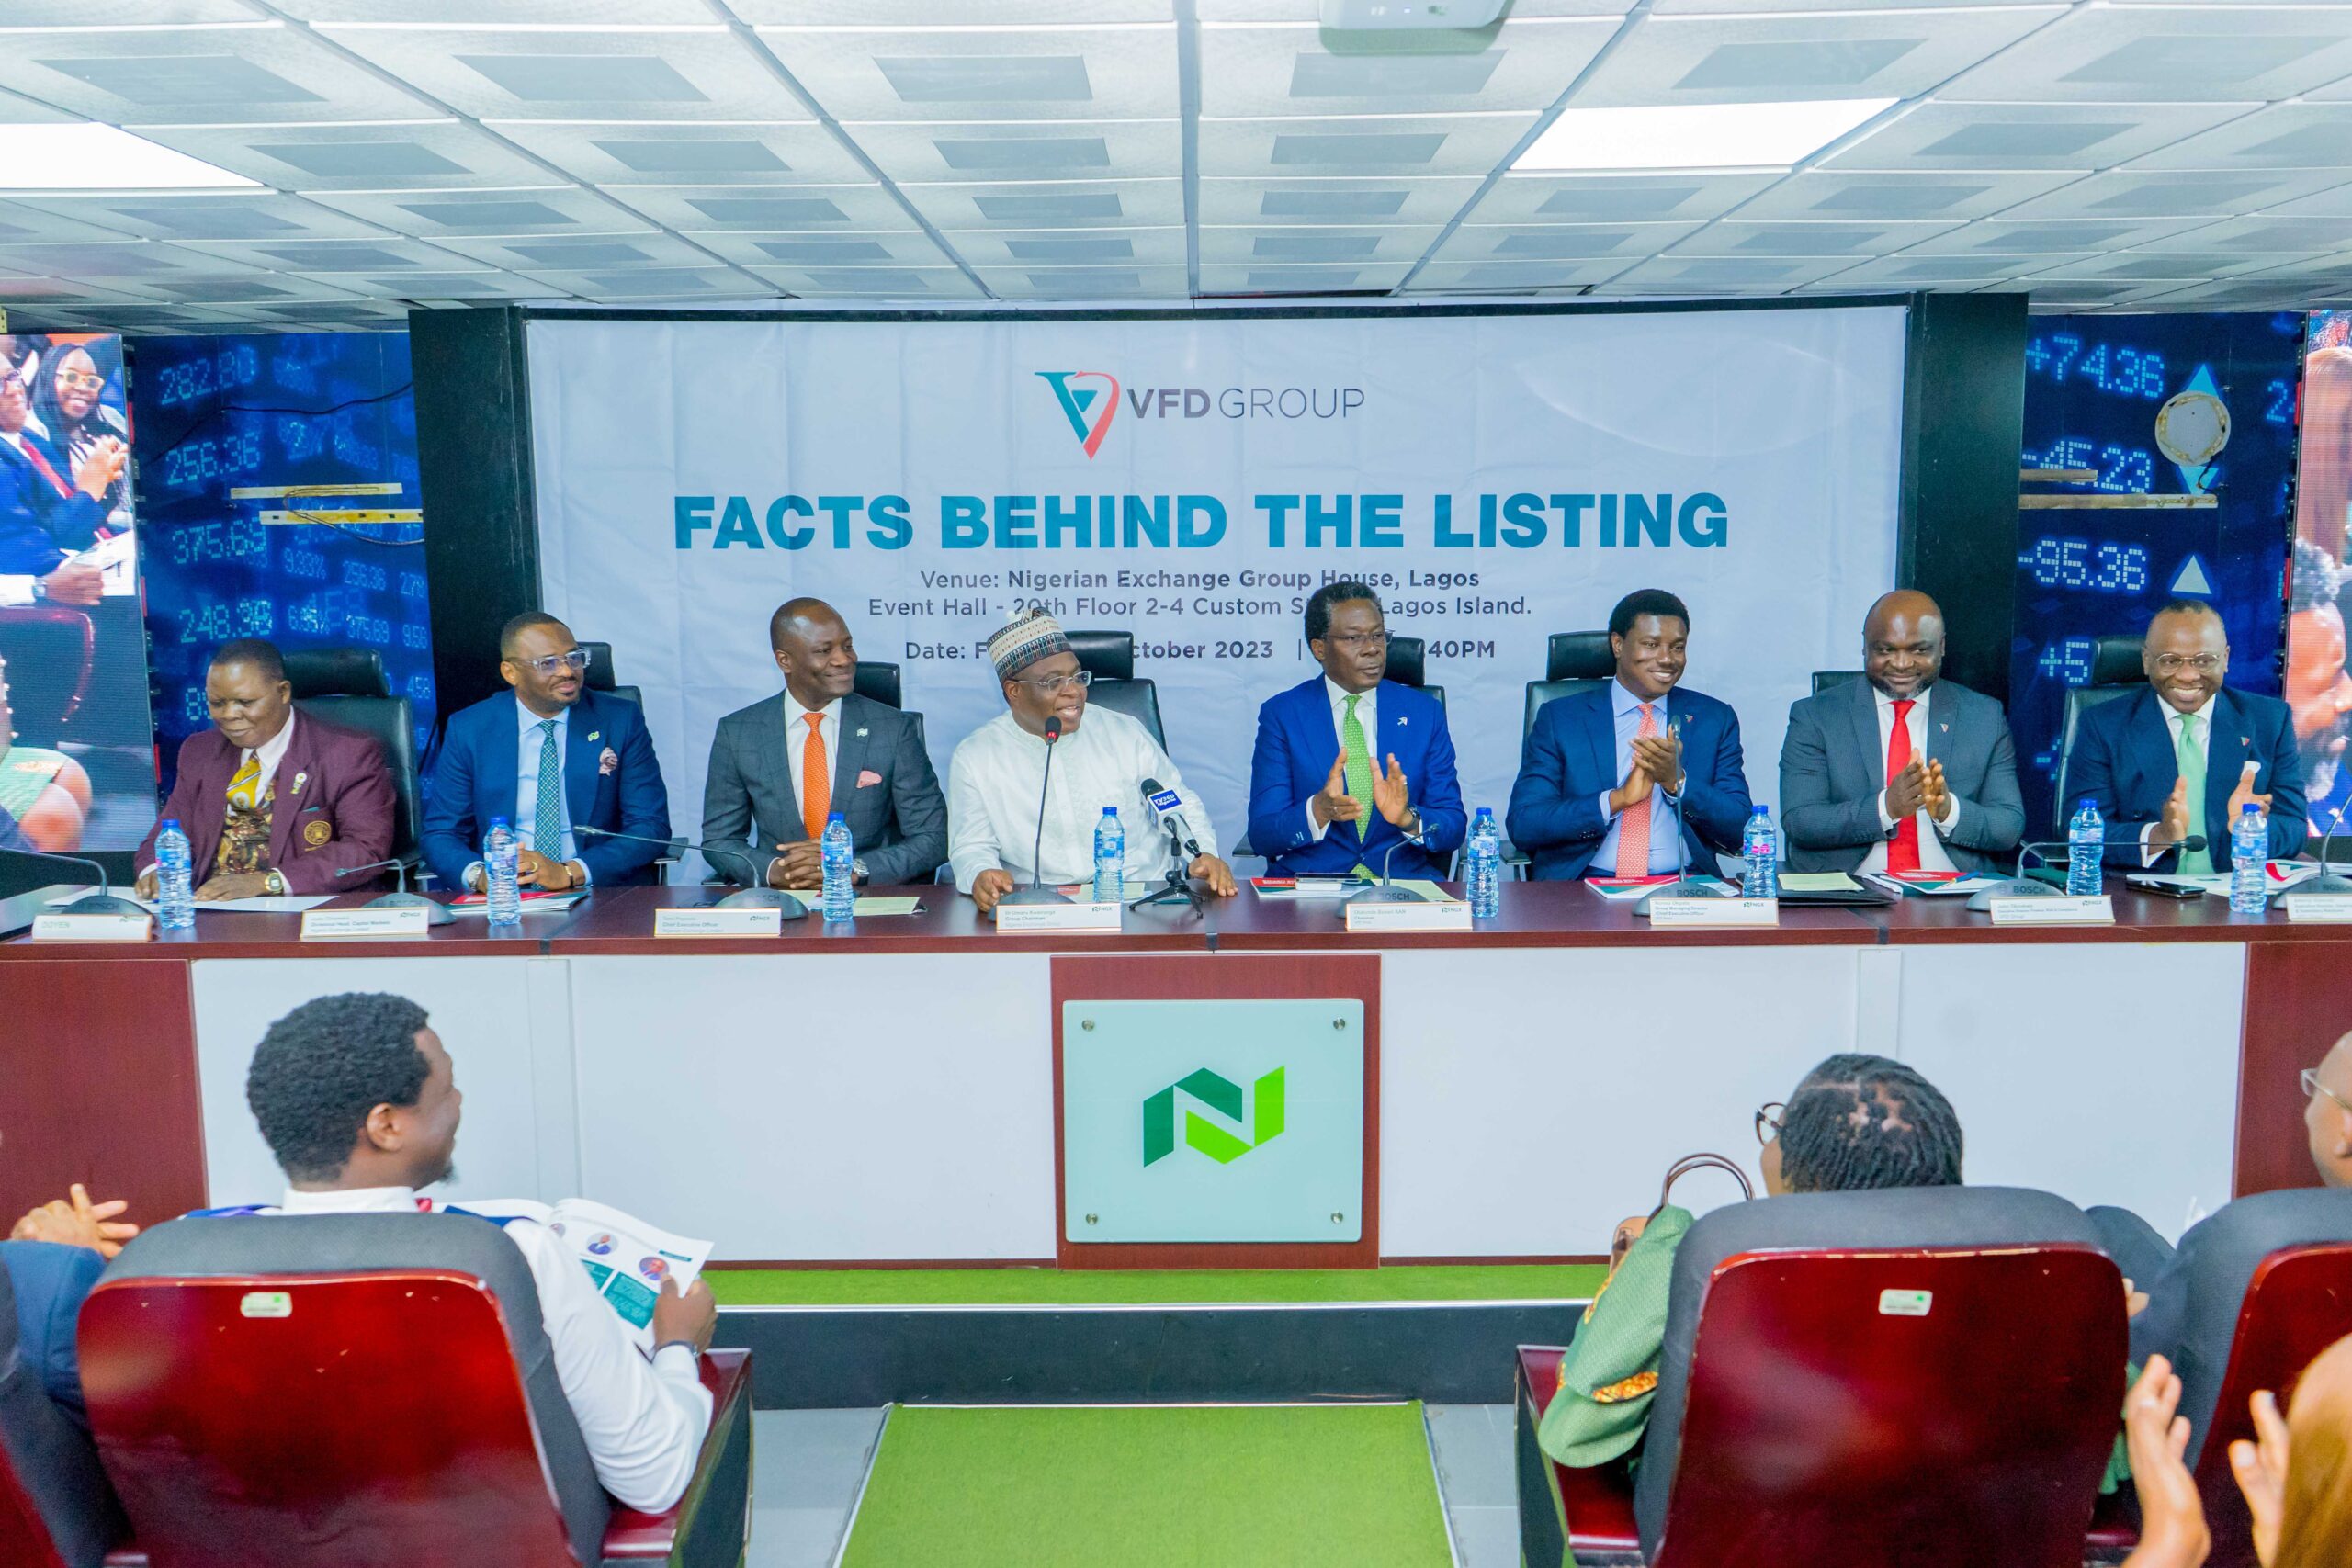 VFD Group Plc Lists on Nigerian Exchange, Commemorates with Closing Gong Ceremony (NGX)